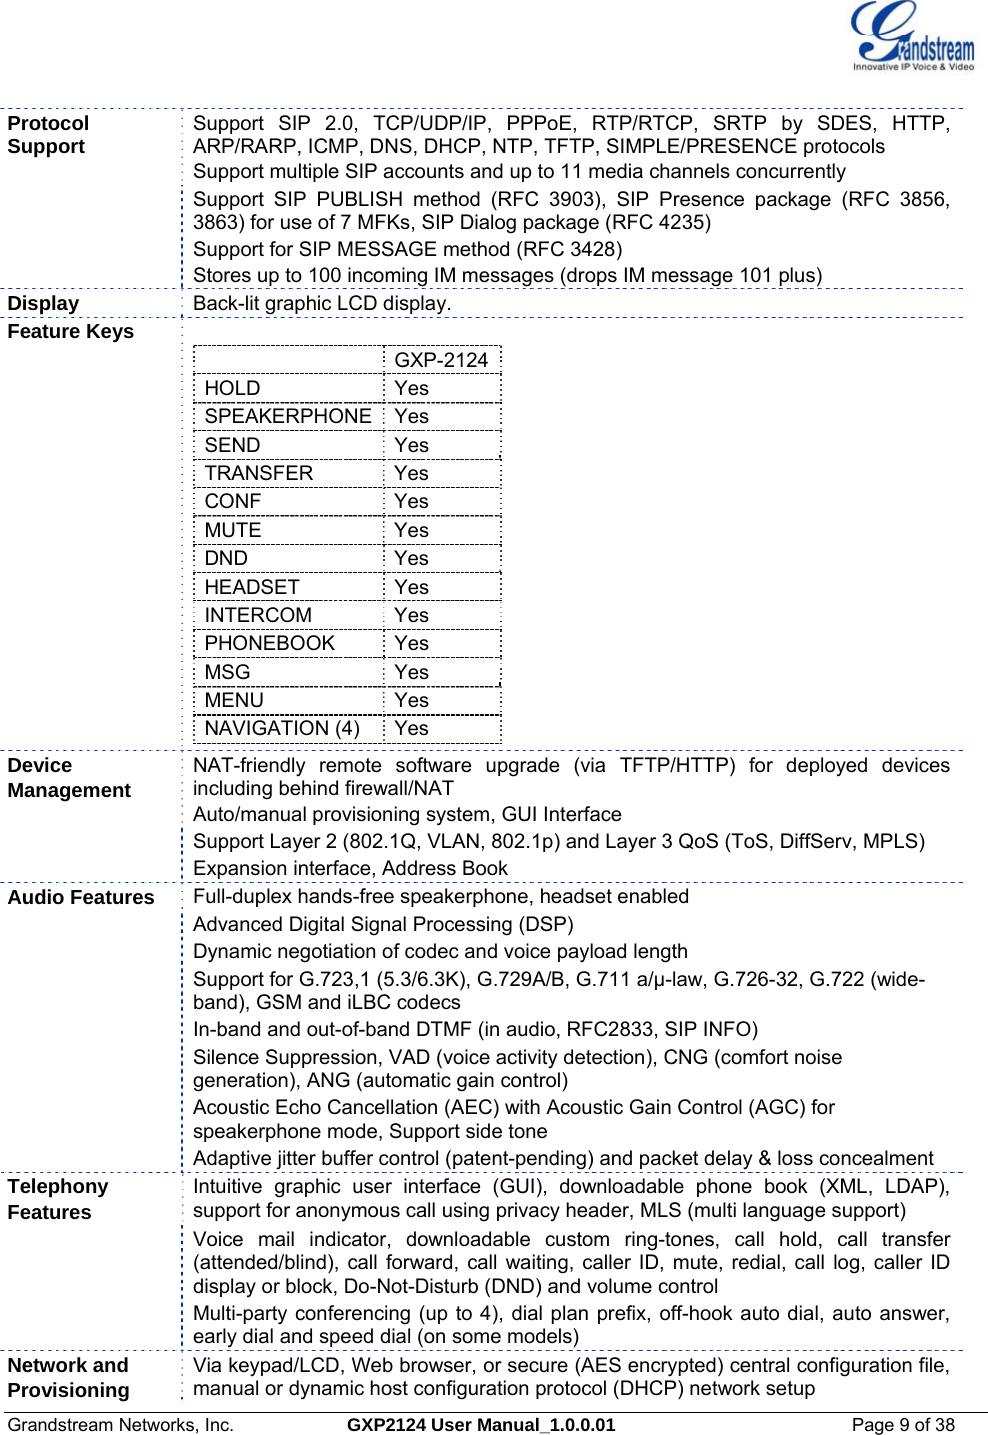  Grandstream Networks, Inc.  GXP2124 User Manual_1.0.0.01  Page 9 of 38                                                                                                                      Protocol Support  Support SIP 2.0, TCP/UDP/IP, PPPoE, RTP/RTCP, SRTP by SDES, HTTP, ARP/RARP, ICMP, DNS, DHCP, NTP, TFTP, SIMPLE/PRESENCE protocols Support multiple SIP accounts and up to 11 media channels concurrently  Support SIP PUBLISH method (RFC 3903), SIP Presence package (RFC 3856, 3863) for use of 7 MFKs, SIP Dialog package (RFC 4235)   Support for SIP MESSAGE method (RFC 3428) Stores up to 100 incoming IM messages (drops IM message 101 plus) Display   Back-lit graphic LCD display. Feature Keys                    GXP-2124HOLD Yes SPEAKERPHONE Yes SEND Yes TRANSFER Yes CONF Yes MUTE Yes DND Yes HEADSET Yes INTERCOM Yes PHONEBOOK Yes MSG Yes MENU   Yes NAVIGATION (4)  Yes  Device  Management  NAT-friendly remote software upgrade (via TFTP/HTTP) for deployed devices including behind firewall/NAT Auto/manual provisioning system, GUI Interface   Support Layer 2 (802.1Q, VLAN, 802.1p) and Layer 3 QoS (ToS, DiffServ, MPLS)   Expansion interface, Address Book Audio Features   Full-duplex hands-free speakerphone, headset enabled  Advanced Digital Signal Processing (DSP)  Dynamic negotiation of codec and voice payload length  Support for G.723,1 (5.3/6.3K), G.729A/B, G.711 a/µ-law, G.726-32, G.722 (wide-band), GSM and iLBC codecs  In-band and out-of-band DTMF (in audio, RFC2833, SIP INFO)  Silence Suppression, VAD (voice activity detection), CNG (comfort noise generation), ANG (automatic gain control)  Acoustic Echo Cancellation (AEC) with Acoustic Gain Control (AGC) for speakerphone mode, Support side tone  Adaptive jitter buffer control (patent-pending) and packet delay &amp; loss concealment Telephony  Features Intuitive graphic user interface (GUI), downloadable phone book (XML, LDAP), support for anonymous call using privacy header, MLS (multi language support)  Voice mail indicator, downloadable custom ring-tones, call hold, call transfer (attended/blind), call forward, call waiting, caller ID, mute, redial, call log, caller ID display or block, Do-Not-Disturb (DND) and volume control  Multi-party conferencing (up to 4), dial plan prefix, off-hook auto dial, auto answer, early dial and speed dial (on some models) Network and  Provisioning Via keypad/LCD, Web browser, or secure (AES encrypted) central configuration file, manual or dynamic host configuration protocol (DHCP) network setup 